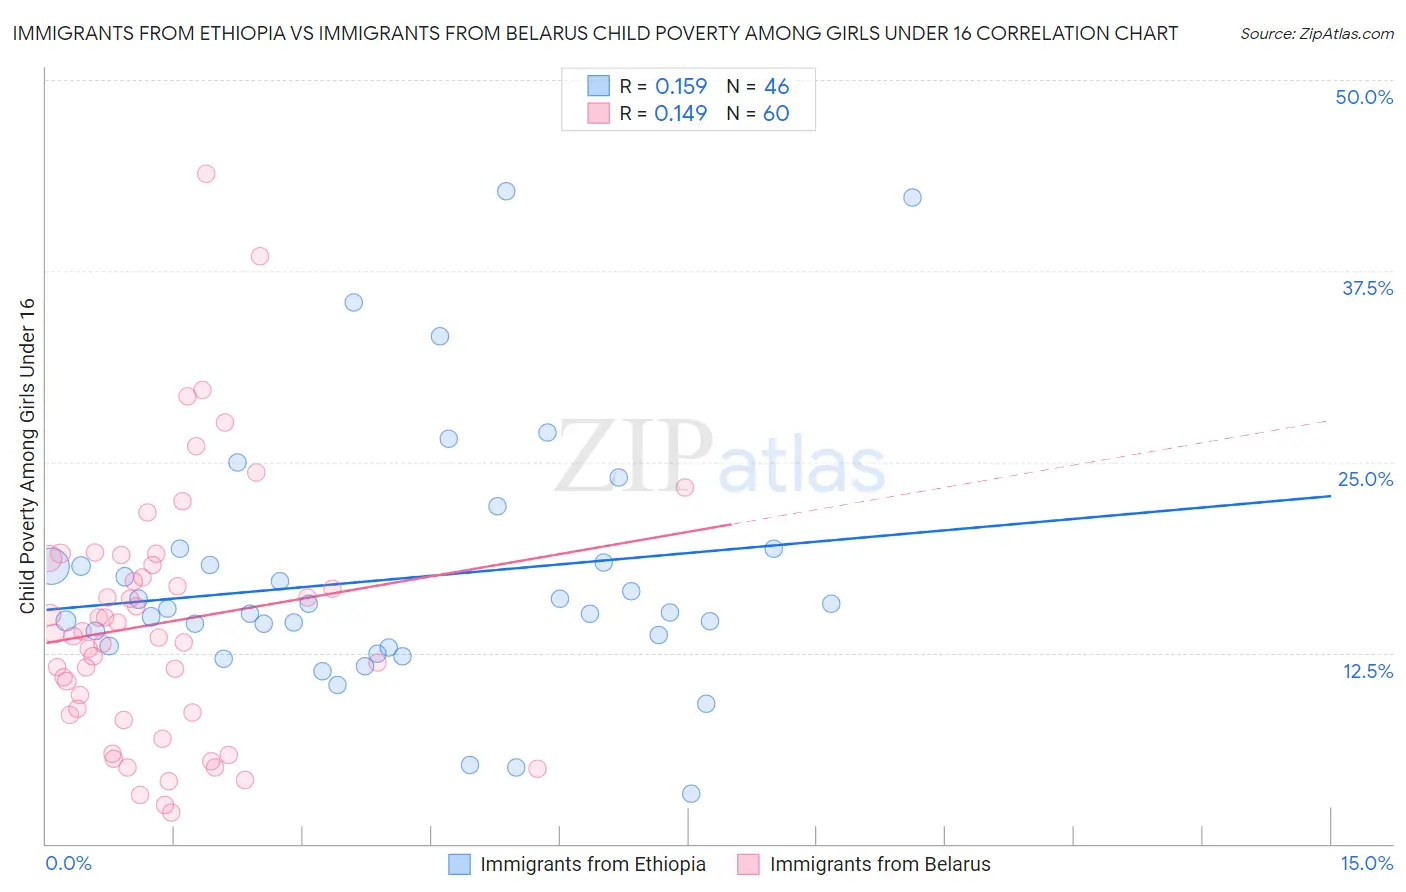 Immigrants from Ethiopia vs Immigrants from Belarus Child Poverty Among Girls Under 16